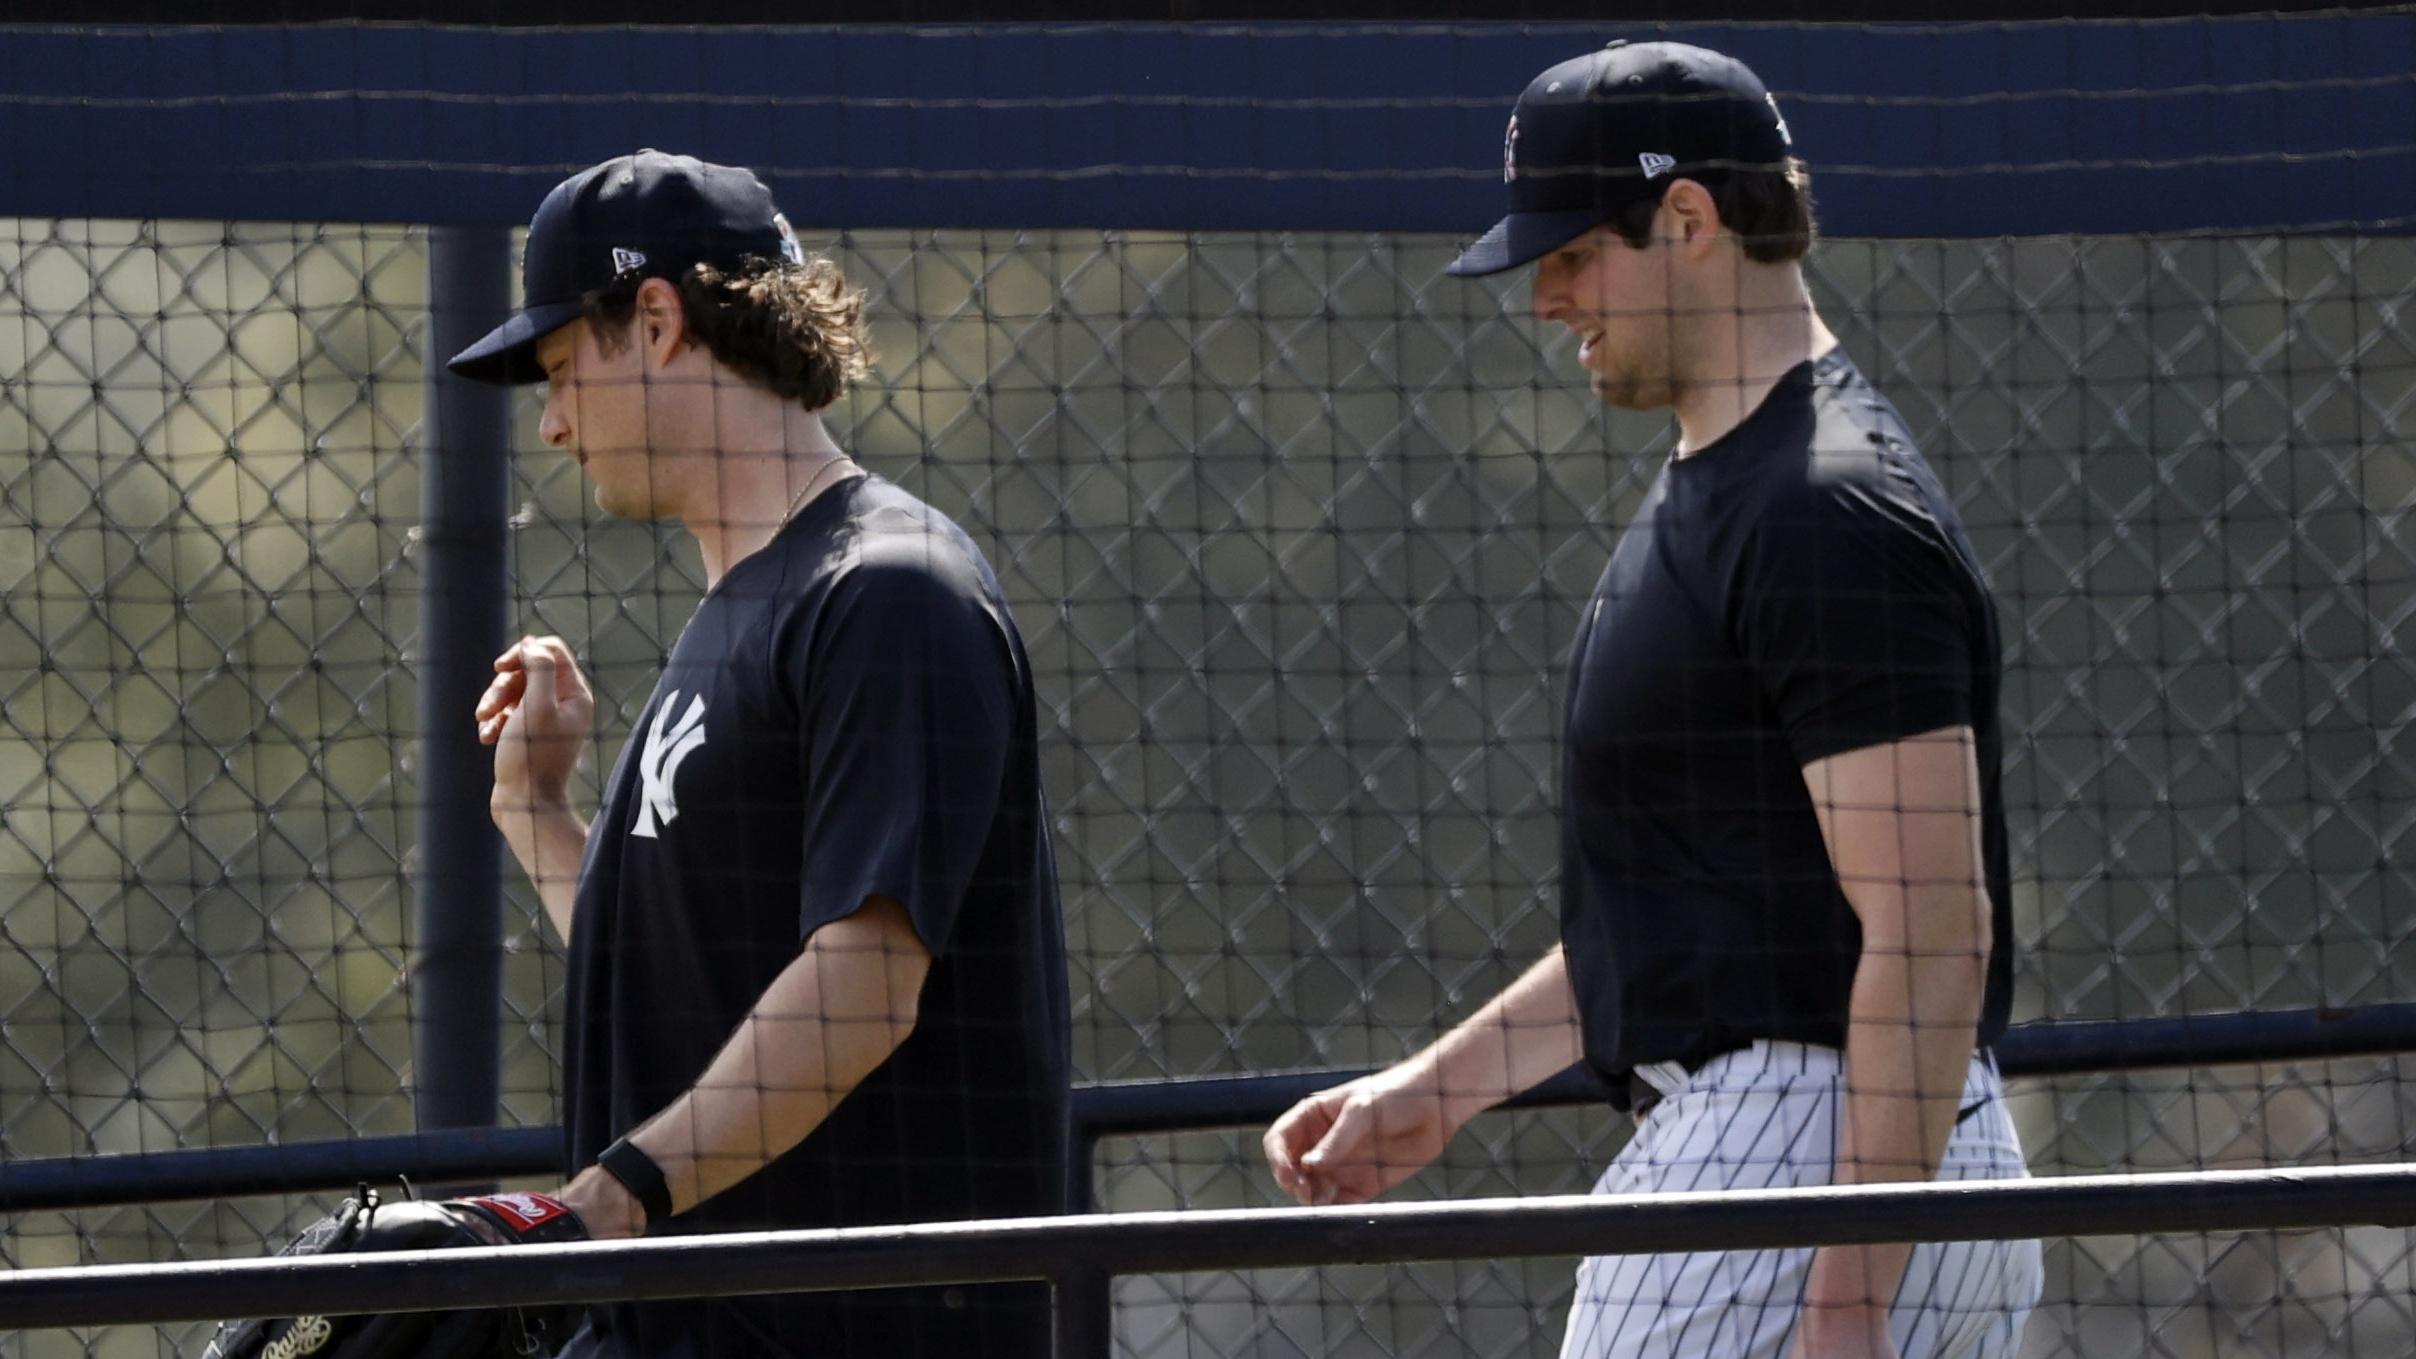 Feb 18, 2021; Tampa, Florida, USA; New York Yankees starting pitcher Gerrit Cole (45) and New York Yankees starting pitcher Jordan Montgomery (47) during the first day of spring training workouts at the Player Development Complex. Mandatory Credit: Kim Klement-USA TODAY Sports / © Kim Klement-USA TODAY Sports